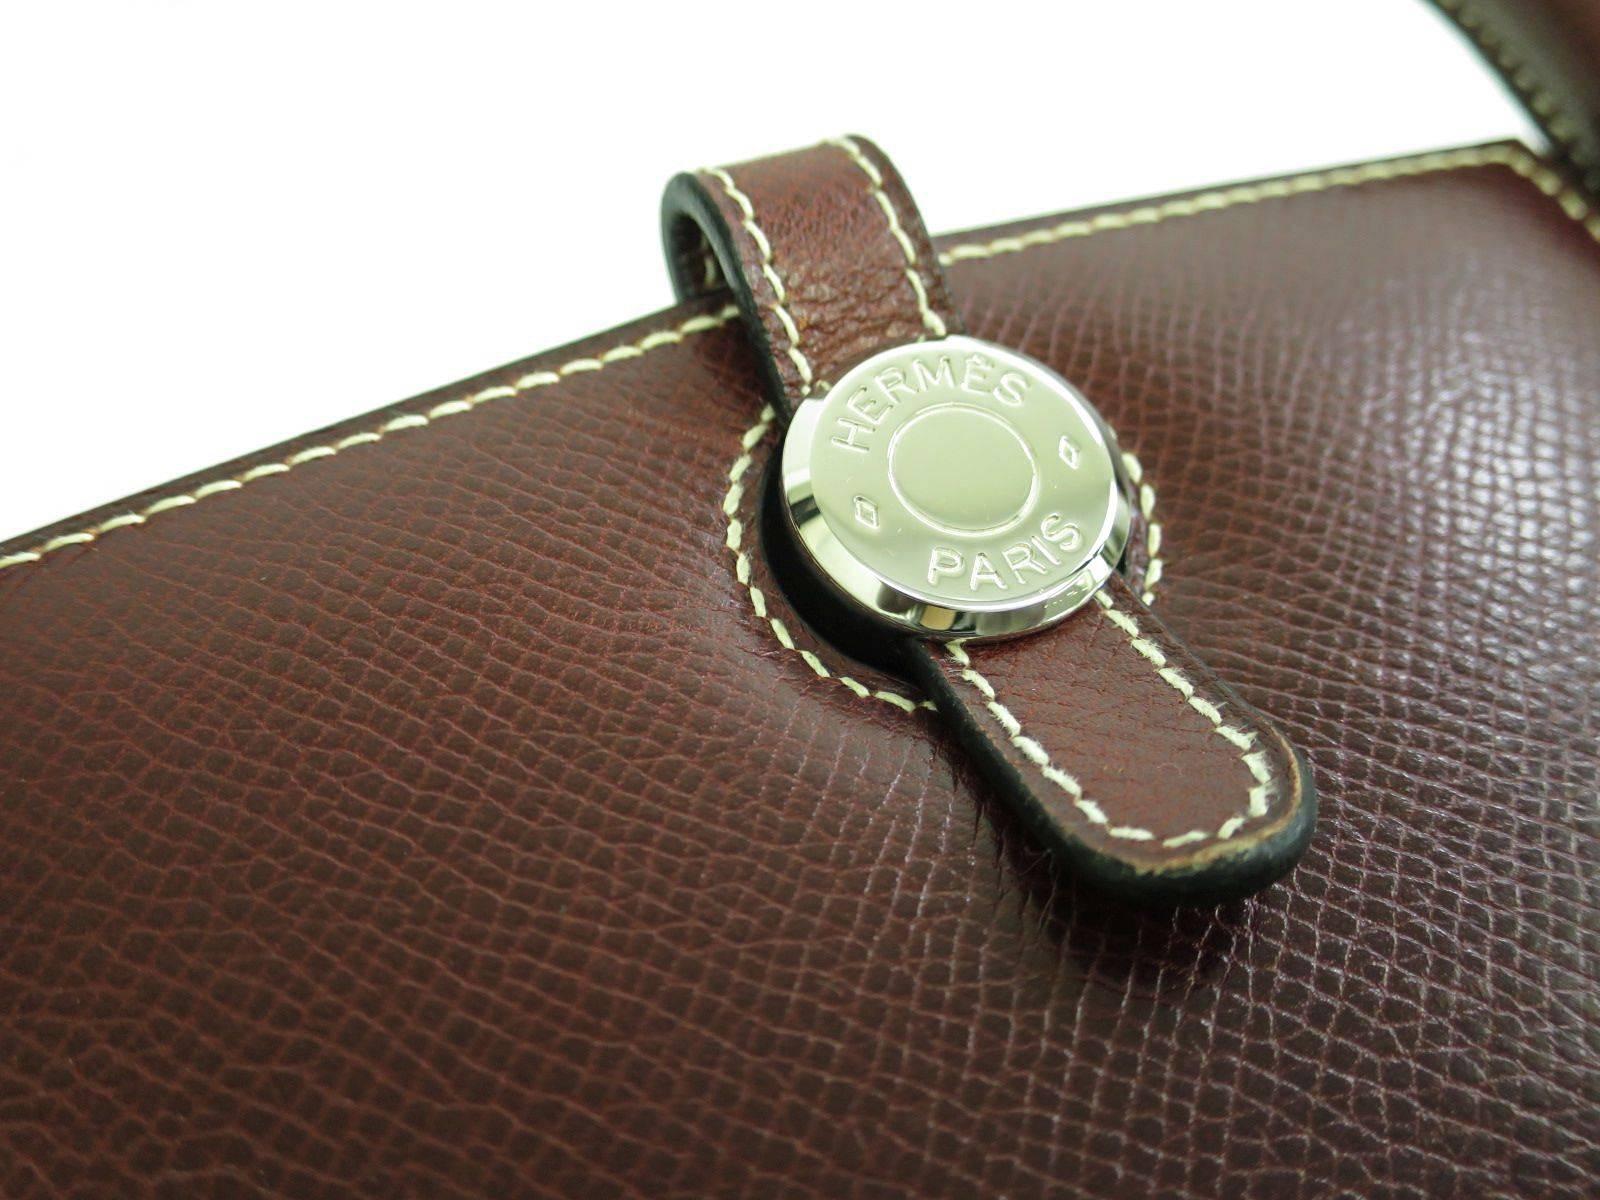 CURATOR'S NOTES

Leather
Palladium hardware
Date code Square E
Made in France
Handle drop 12